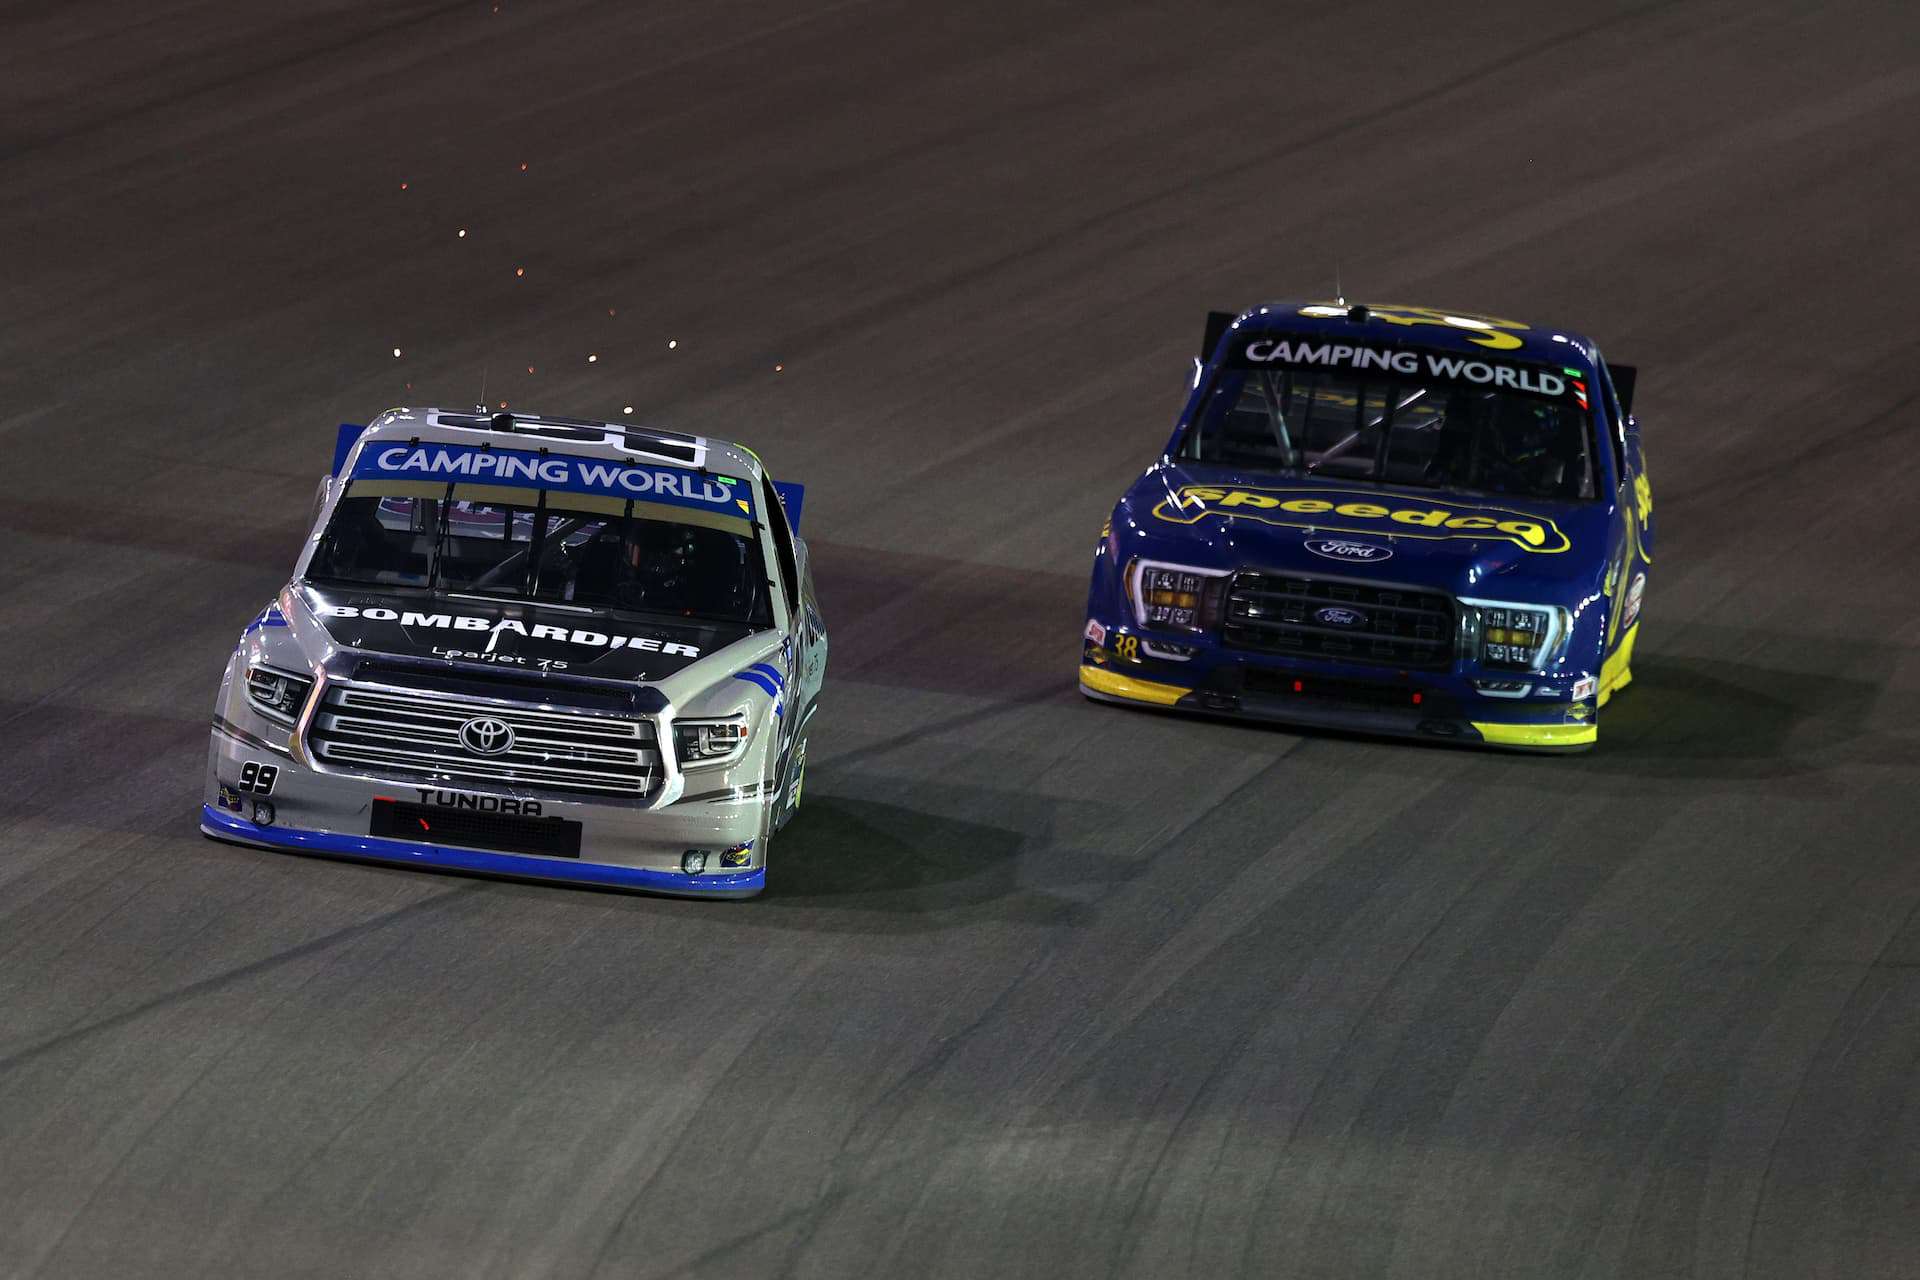 Todd Gilliland doesn't get the push he needs on the final restart to finish fifth in the Victoria's Voice Foundation 200 at Las Vegas Motor Speedway in the NASCAR Camping World Truck Series. Photo by Meg Oliphant/Getty Images